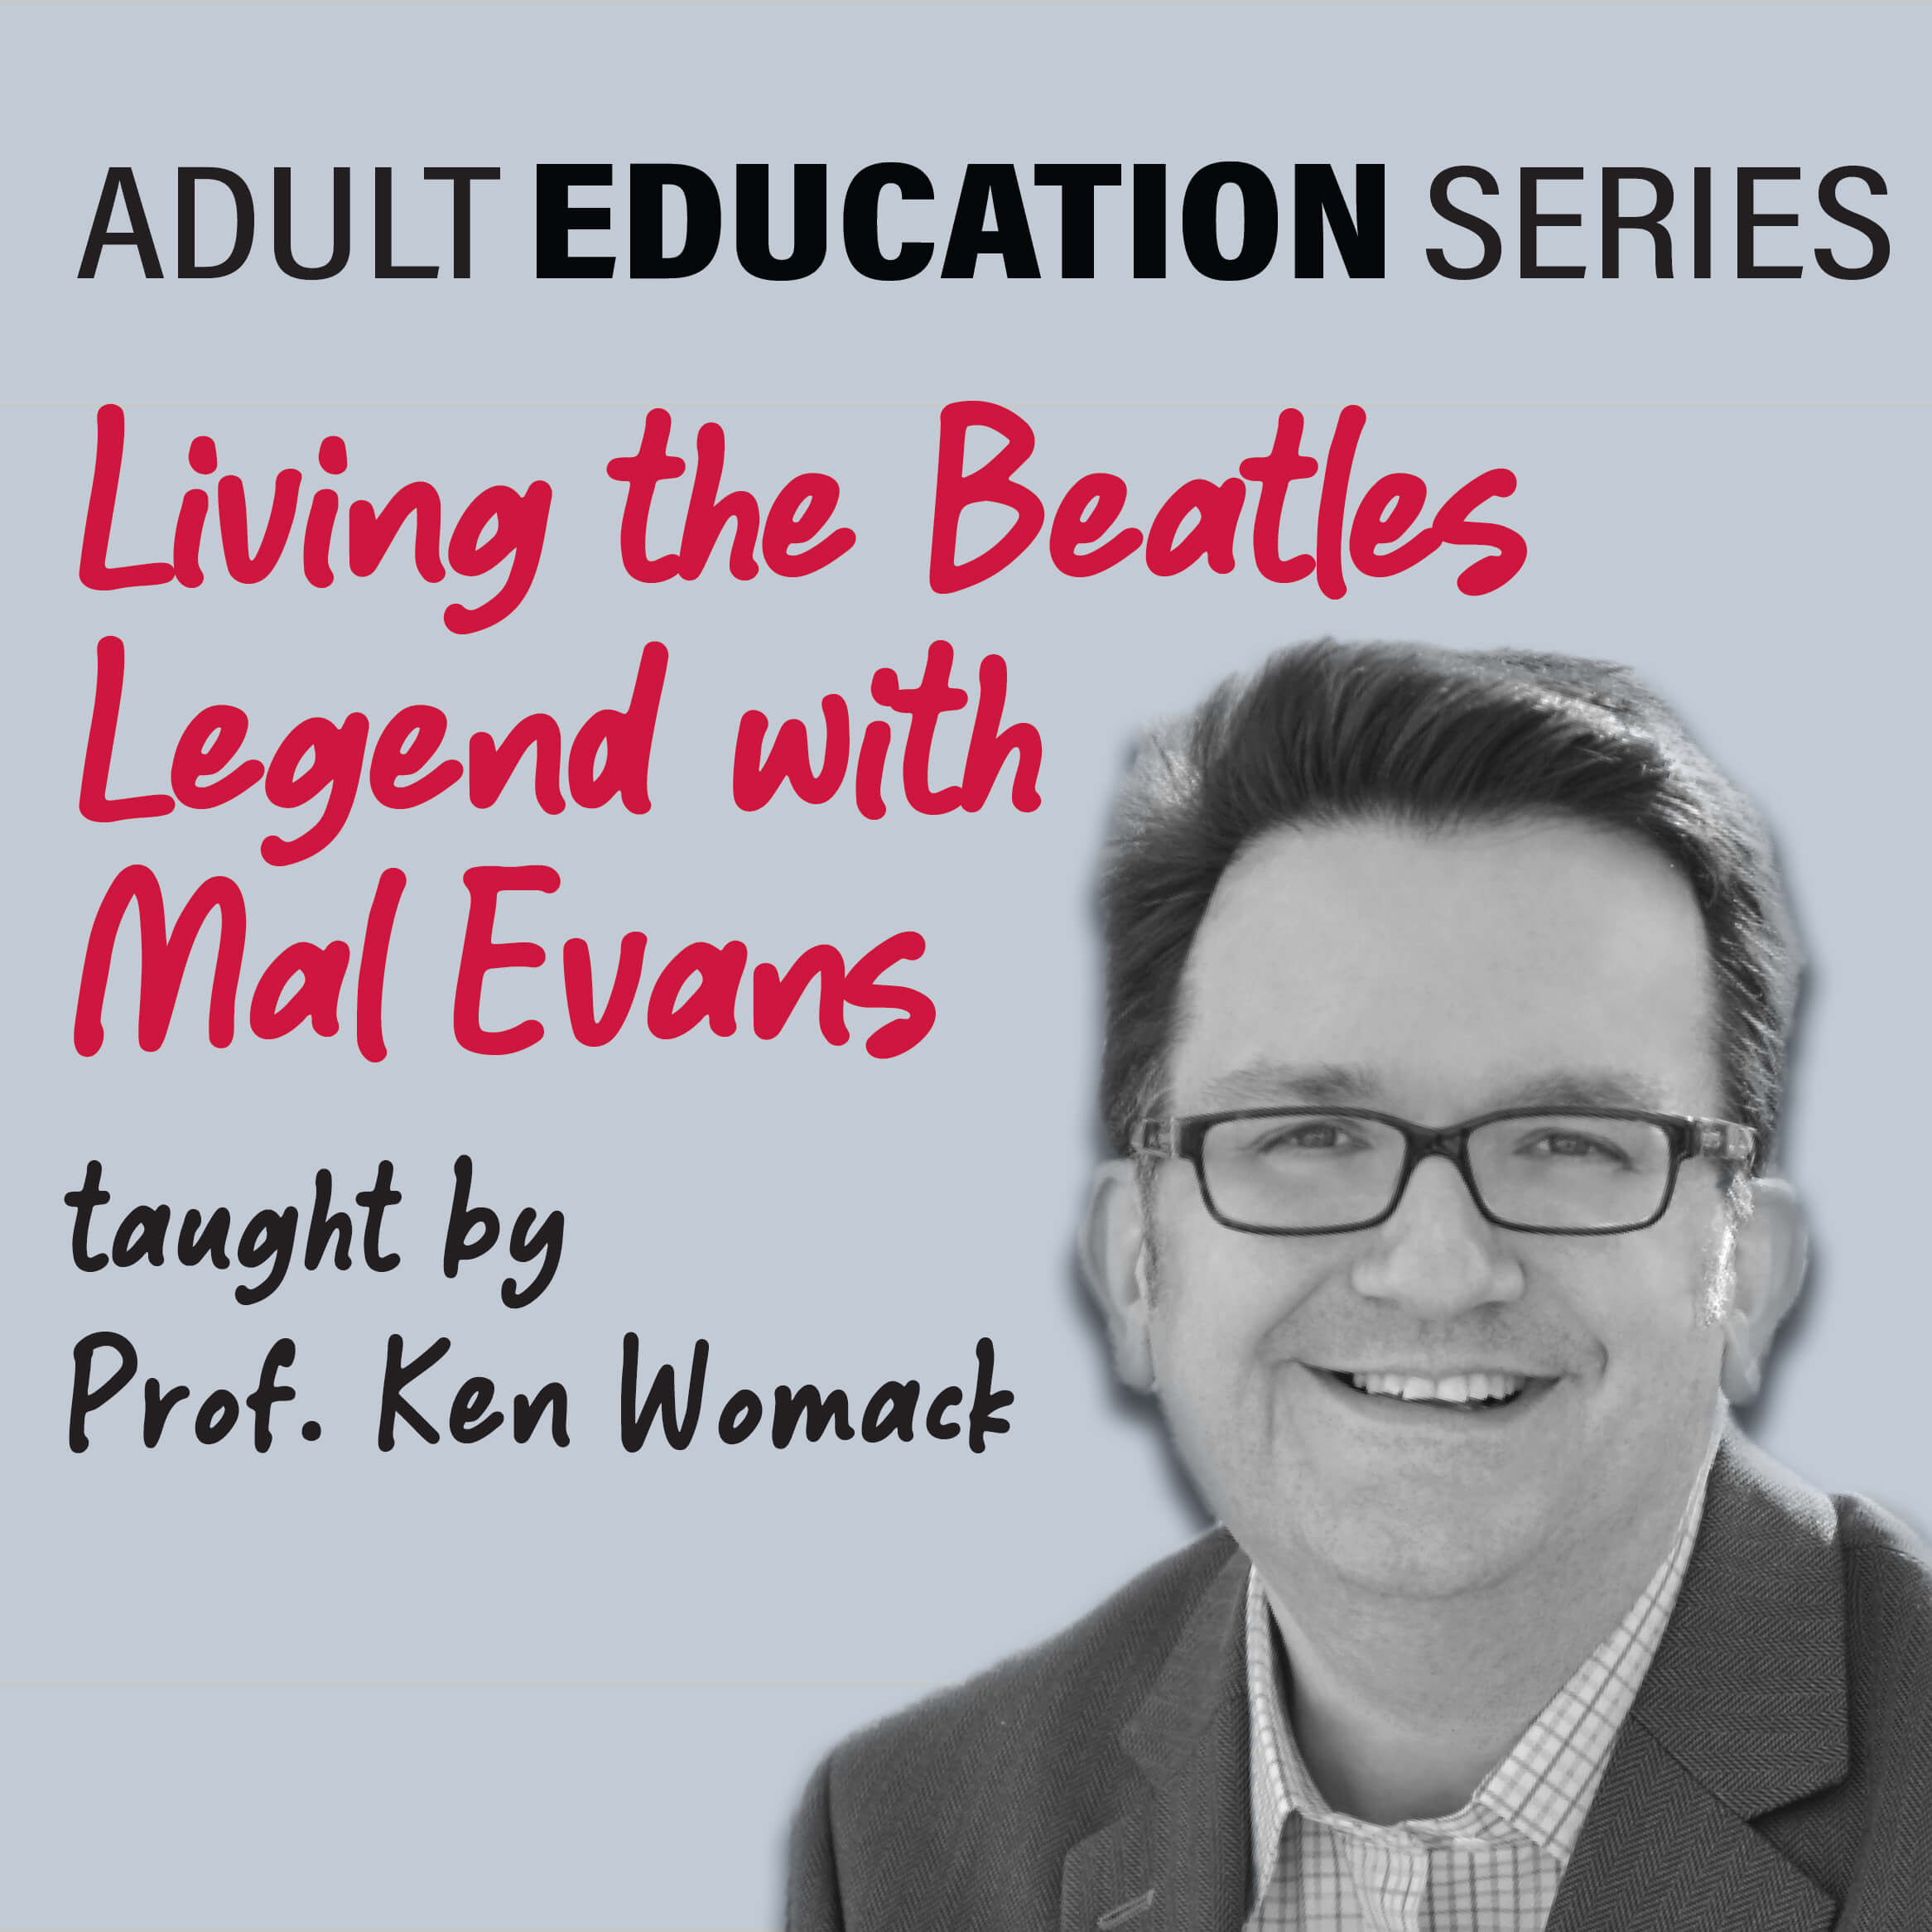 Living the Beatles Legend with Mal Evans